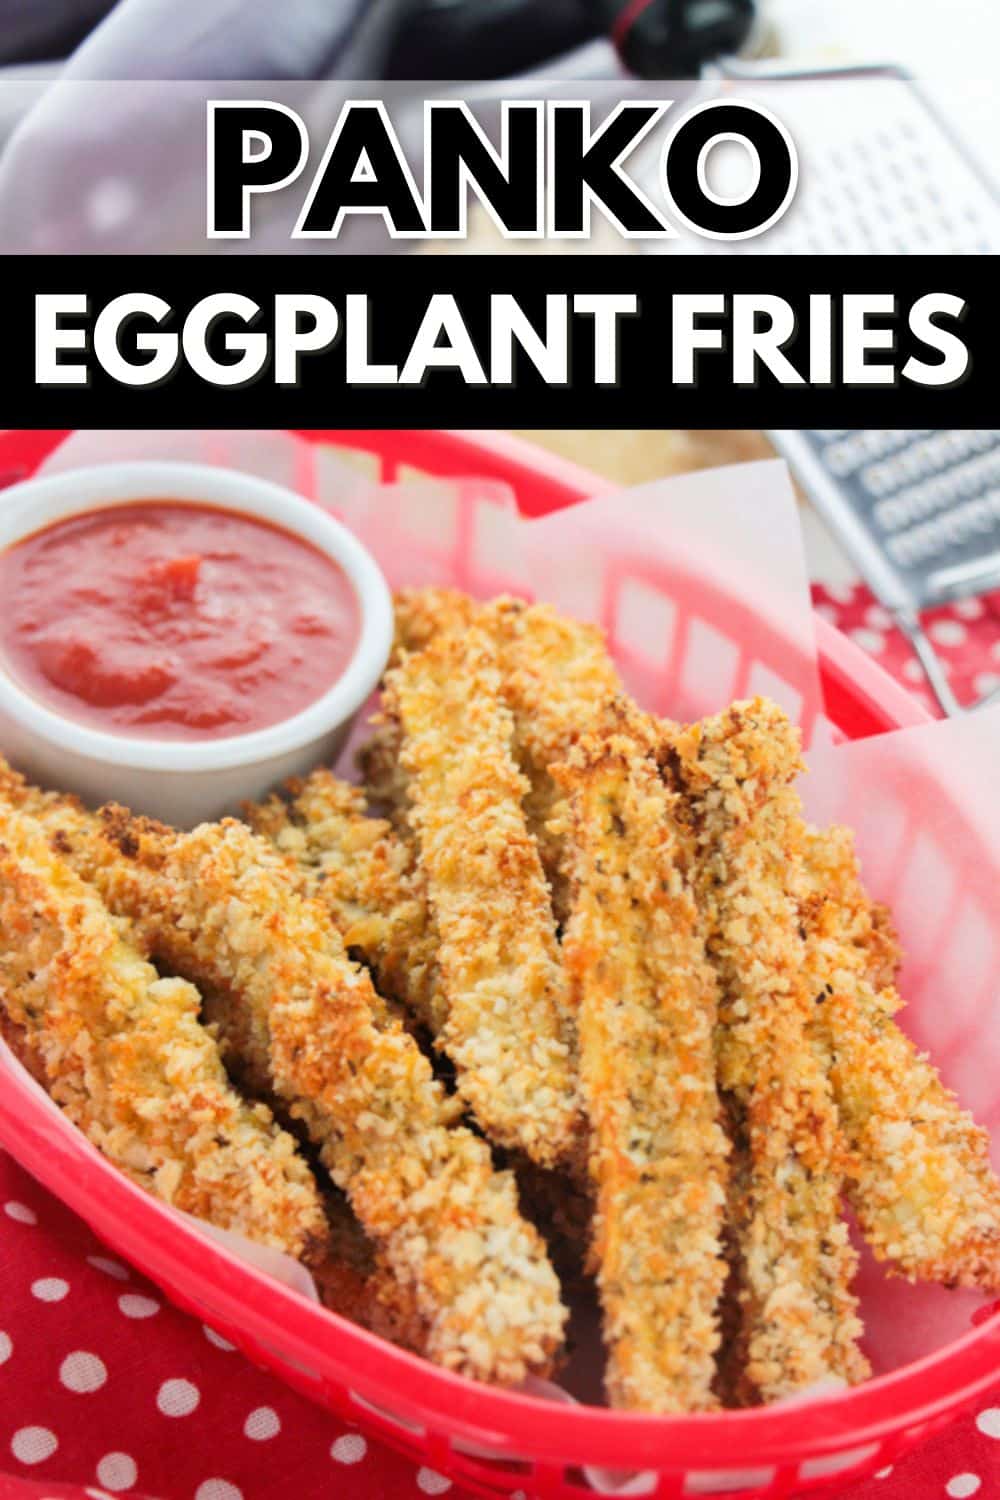 Delicious Panko eggplant fries served in a basket with a side of ketchup.